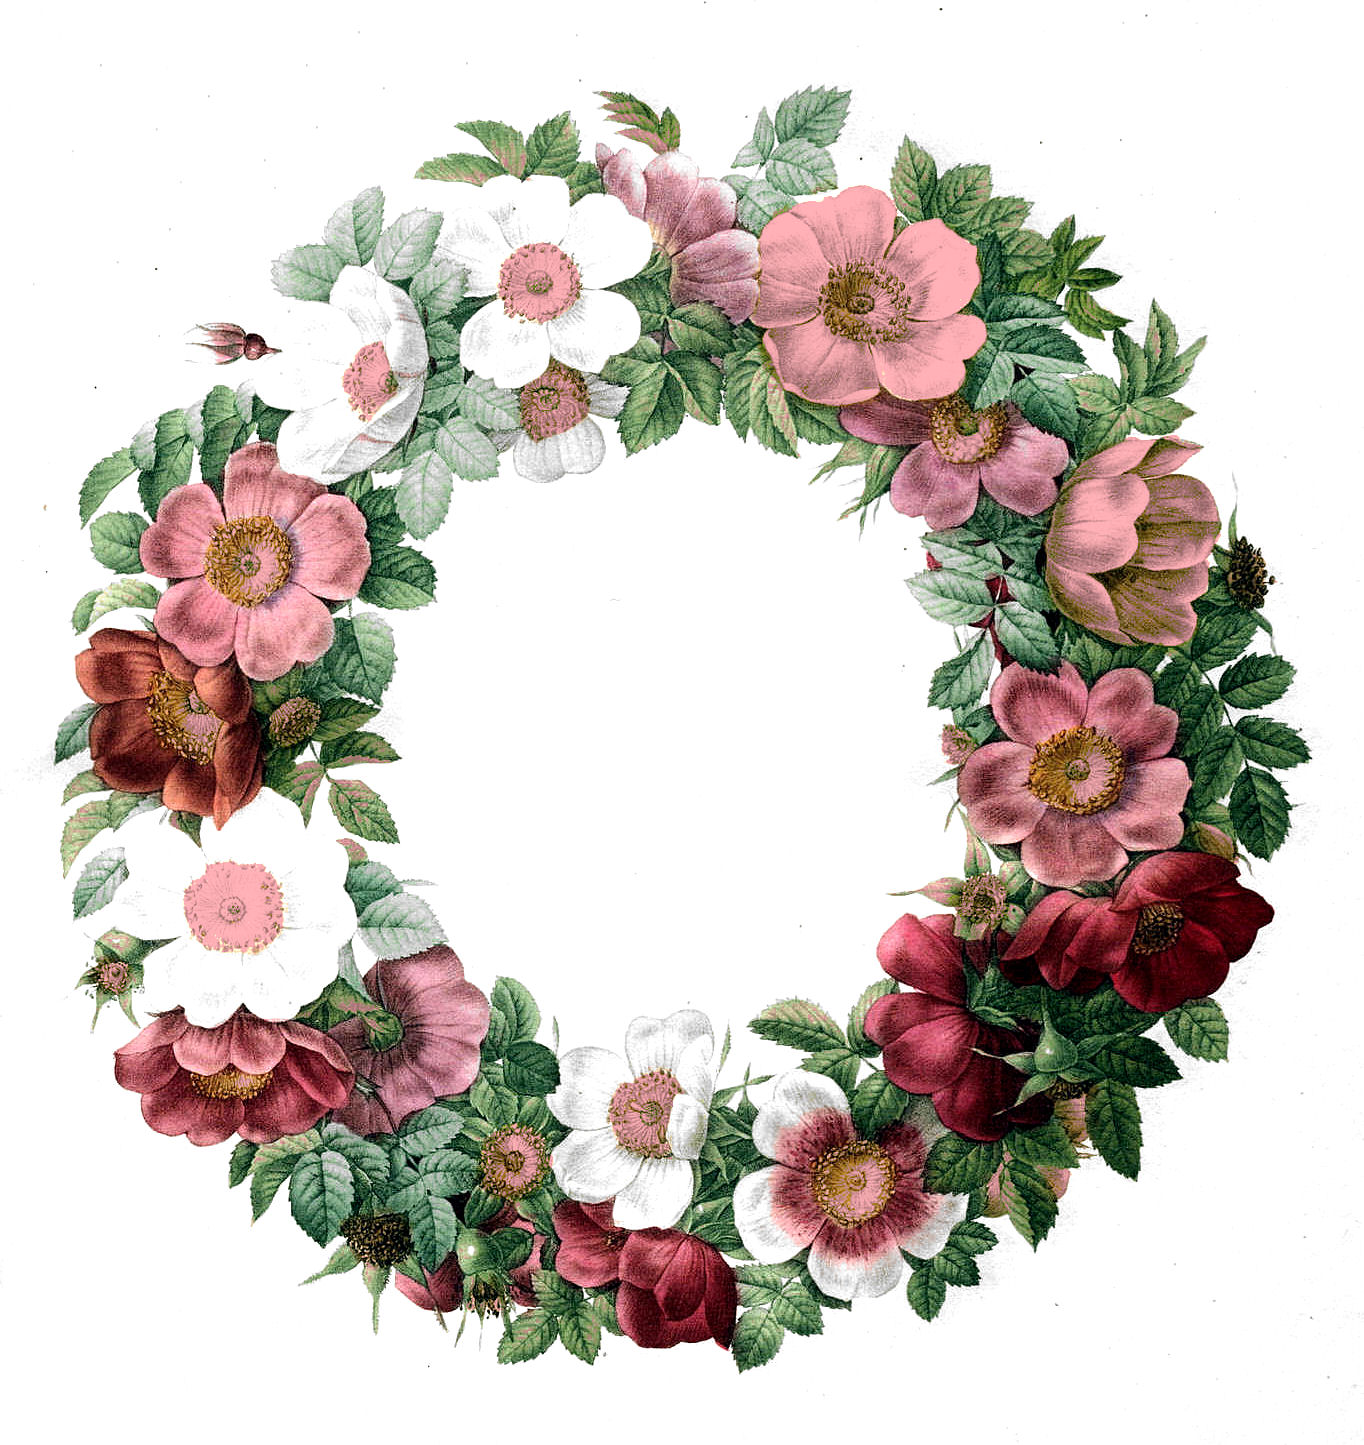 Today I M Offering Two Pretty Antique Floral Wreaths   The One At